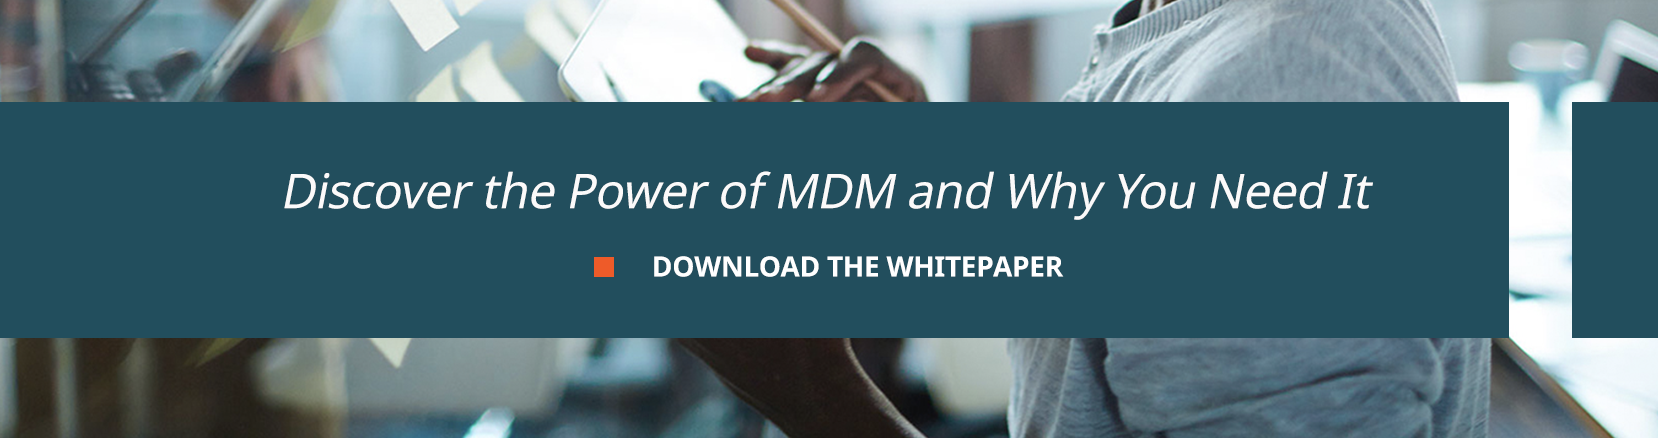 discover the power of mdm and why you need it